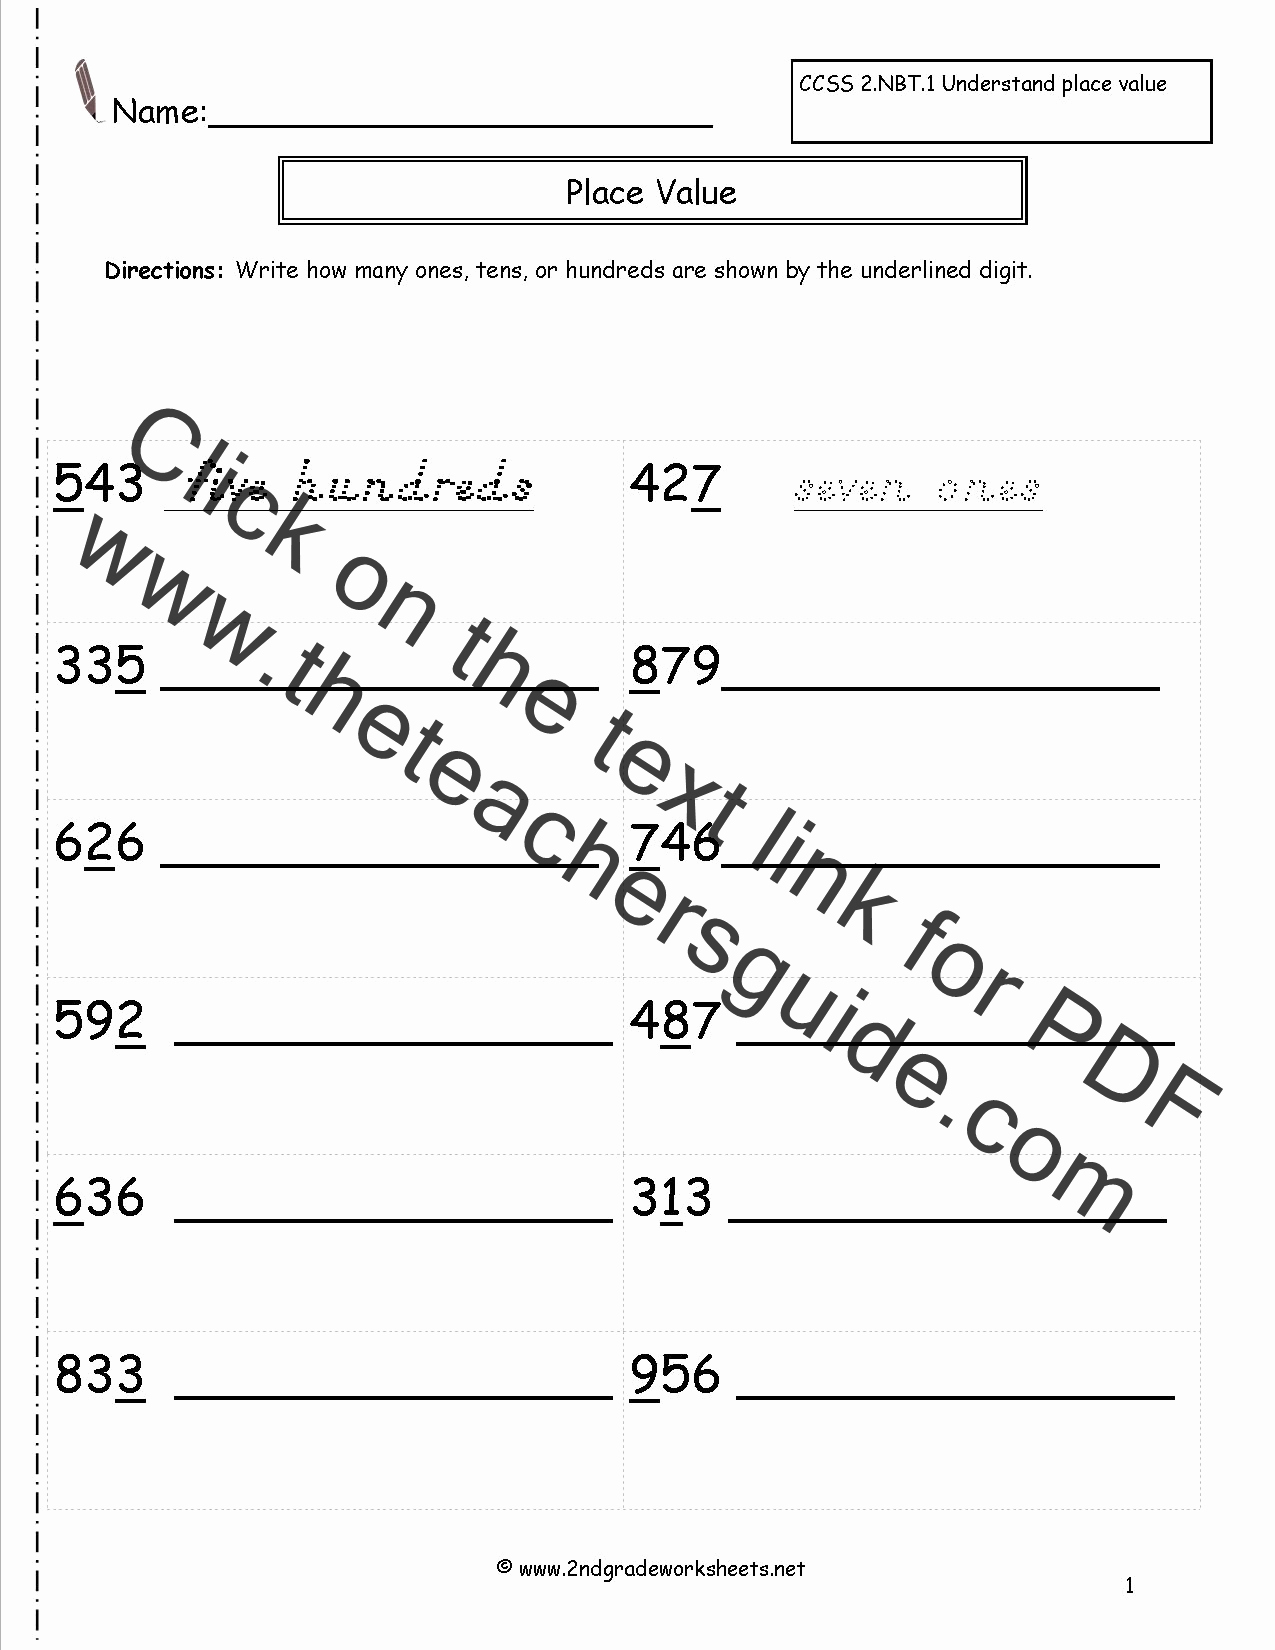 Common Core Worksheets Place Value Lovely Mon Core Worksheets Place Value Favorite Worksheet